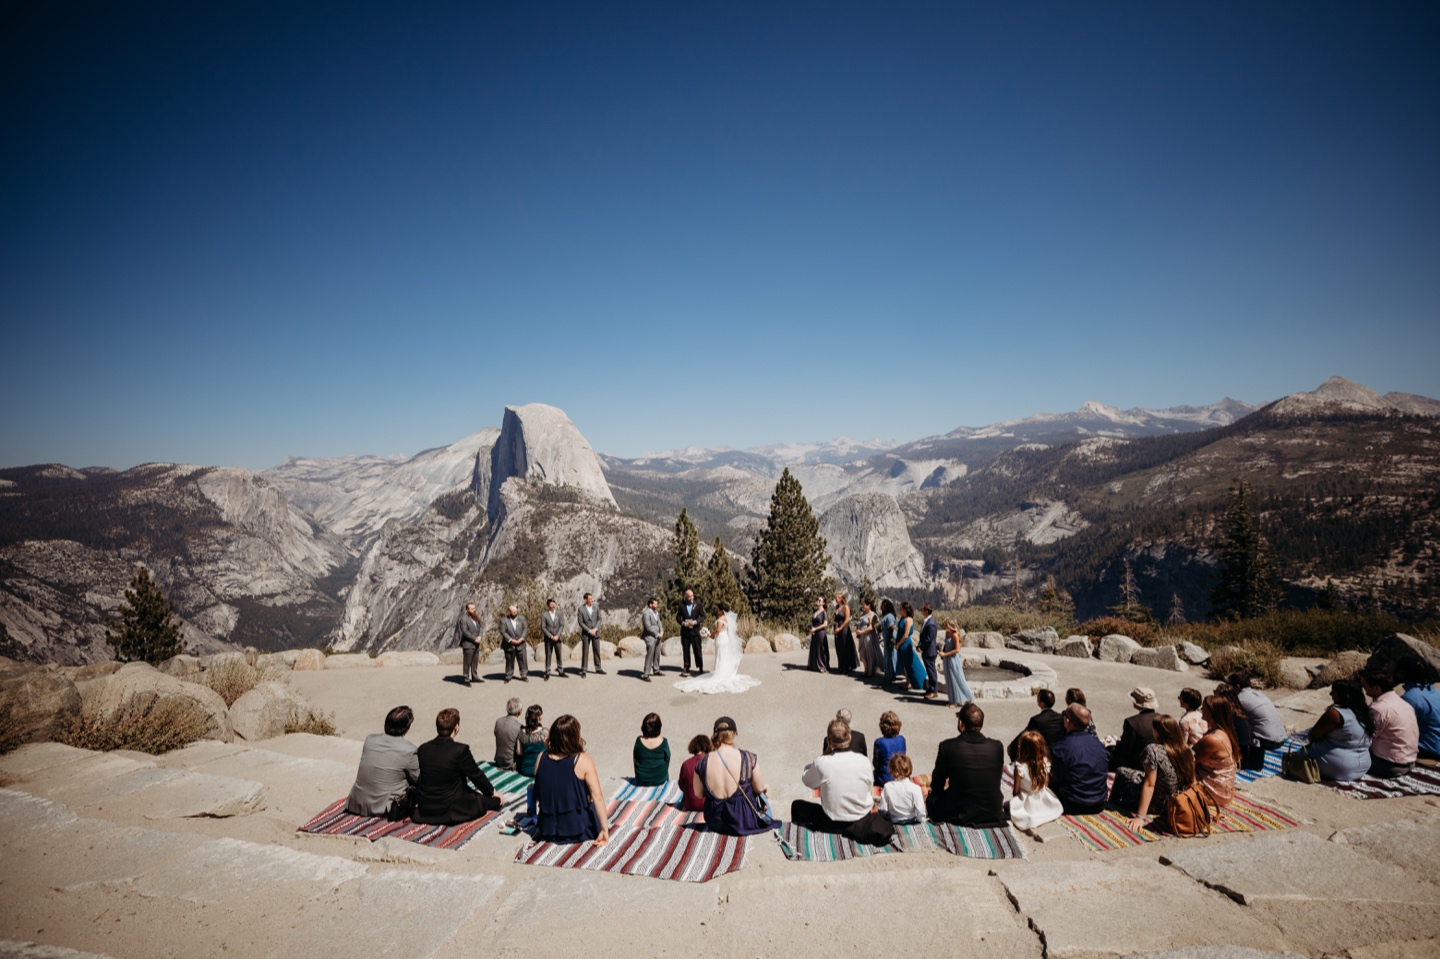 Guests watch bride and groom get married at the Glacier Point amphitheater in Yosemite National Park